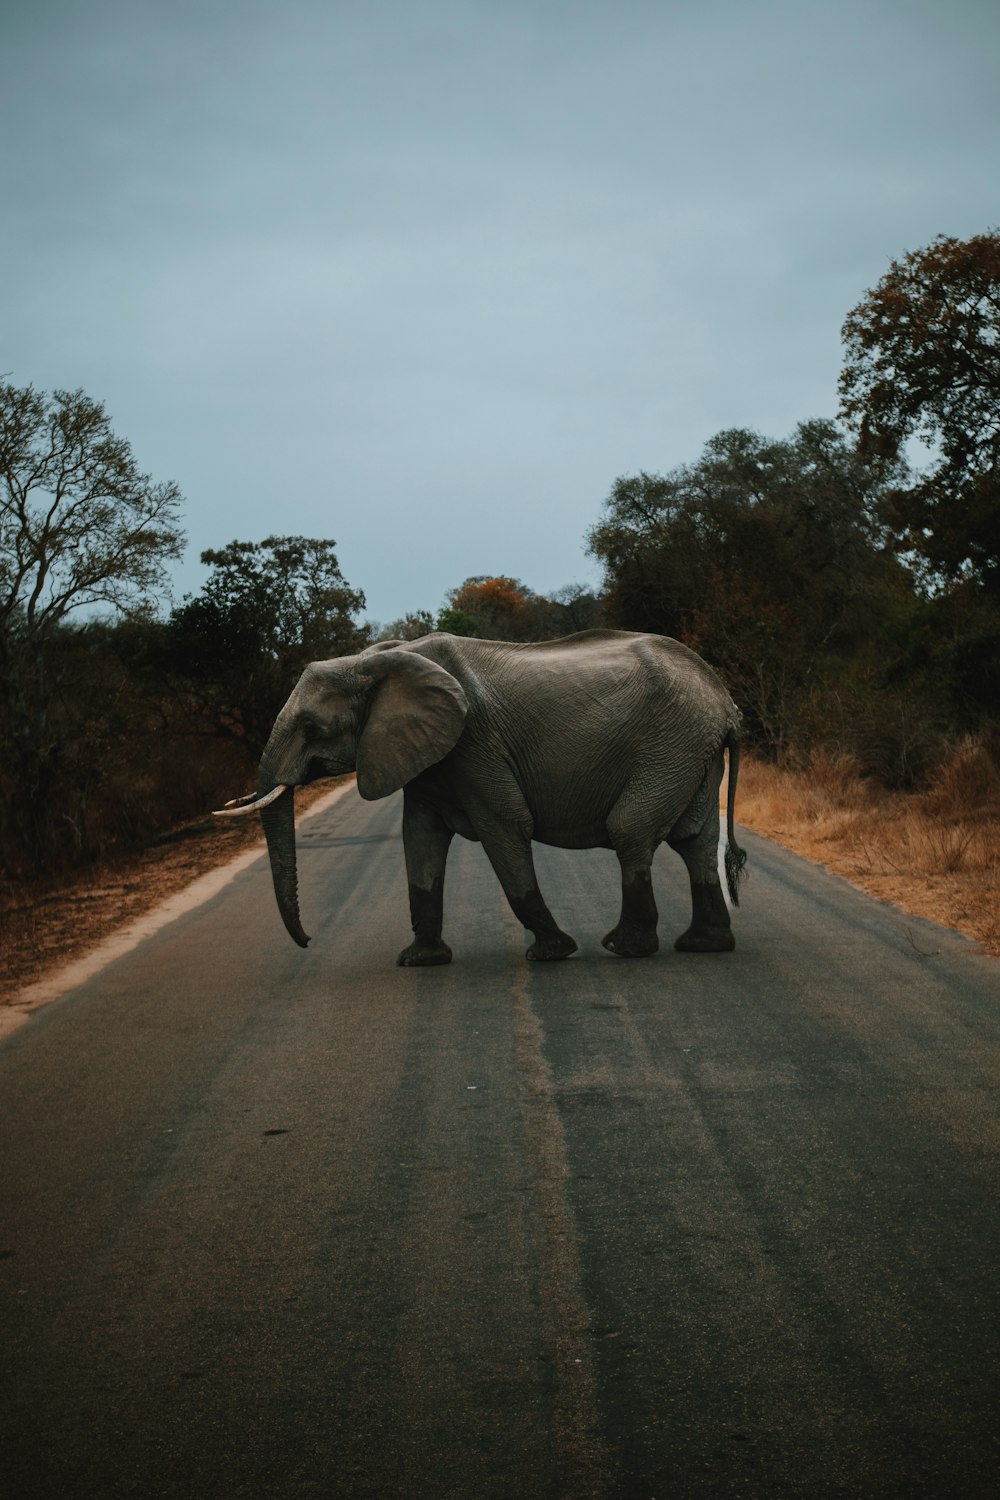 an elephant crossing the road in front of a car